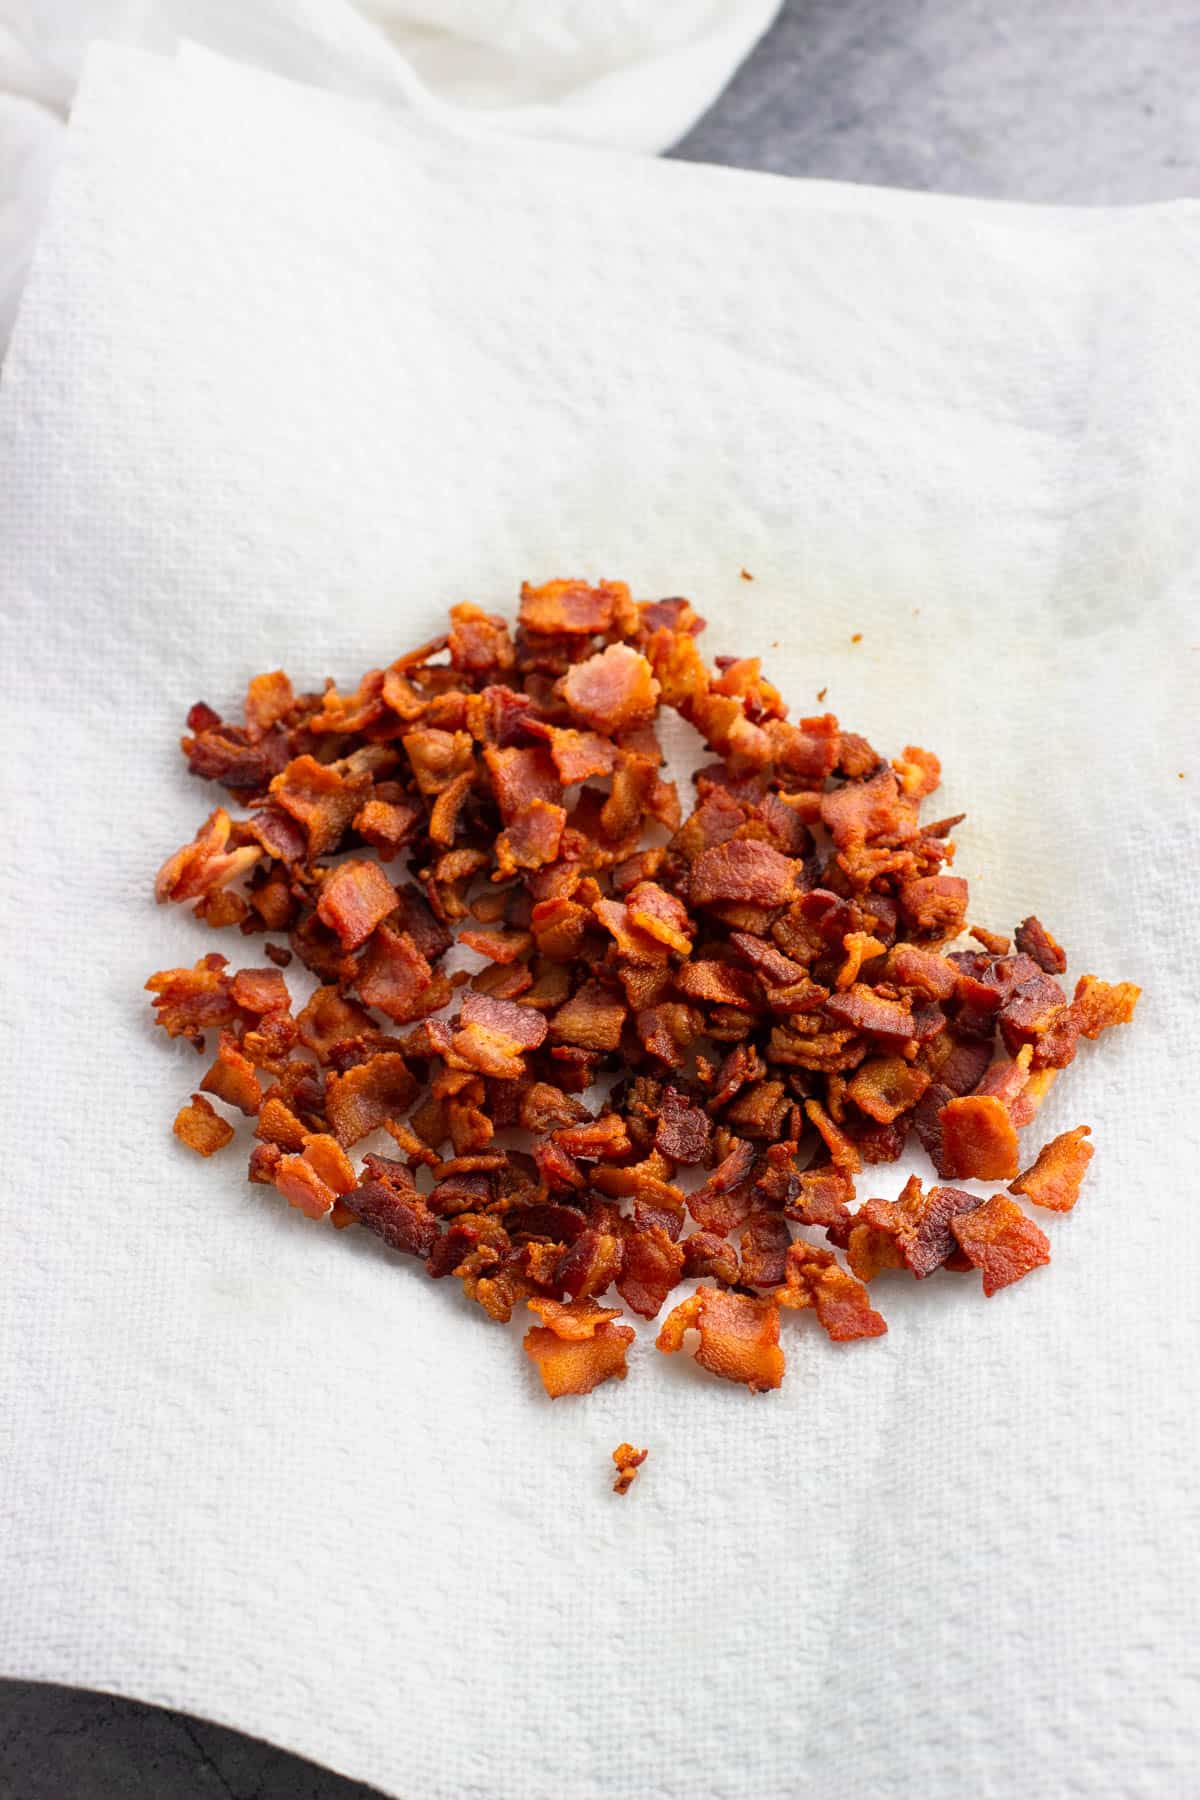 Cooked bacon crumbles on paper towels.